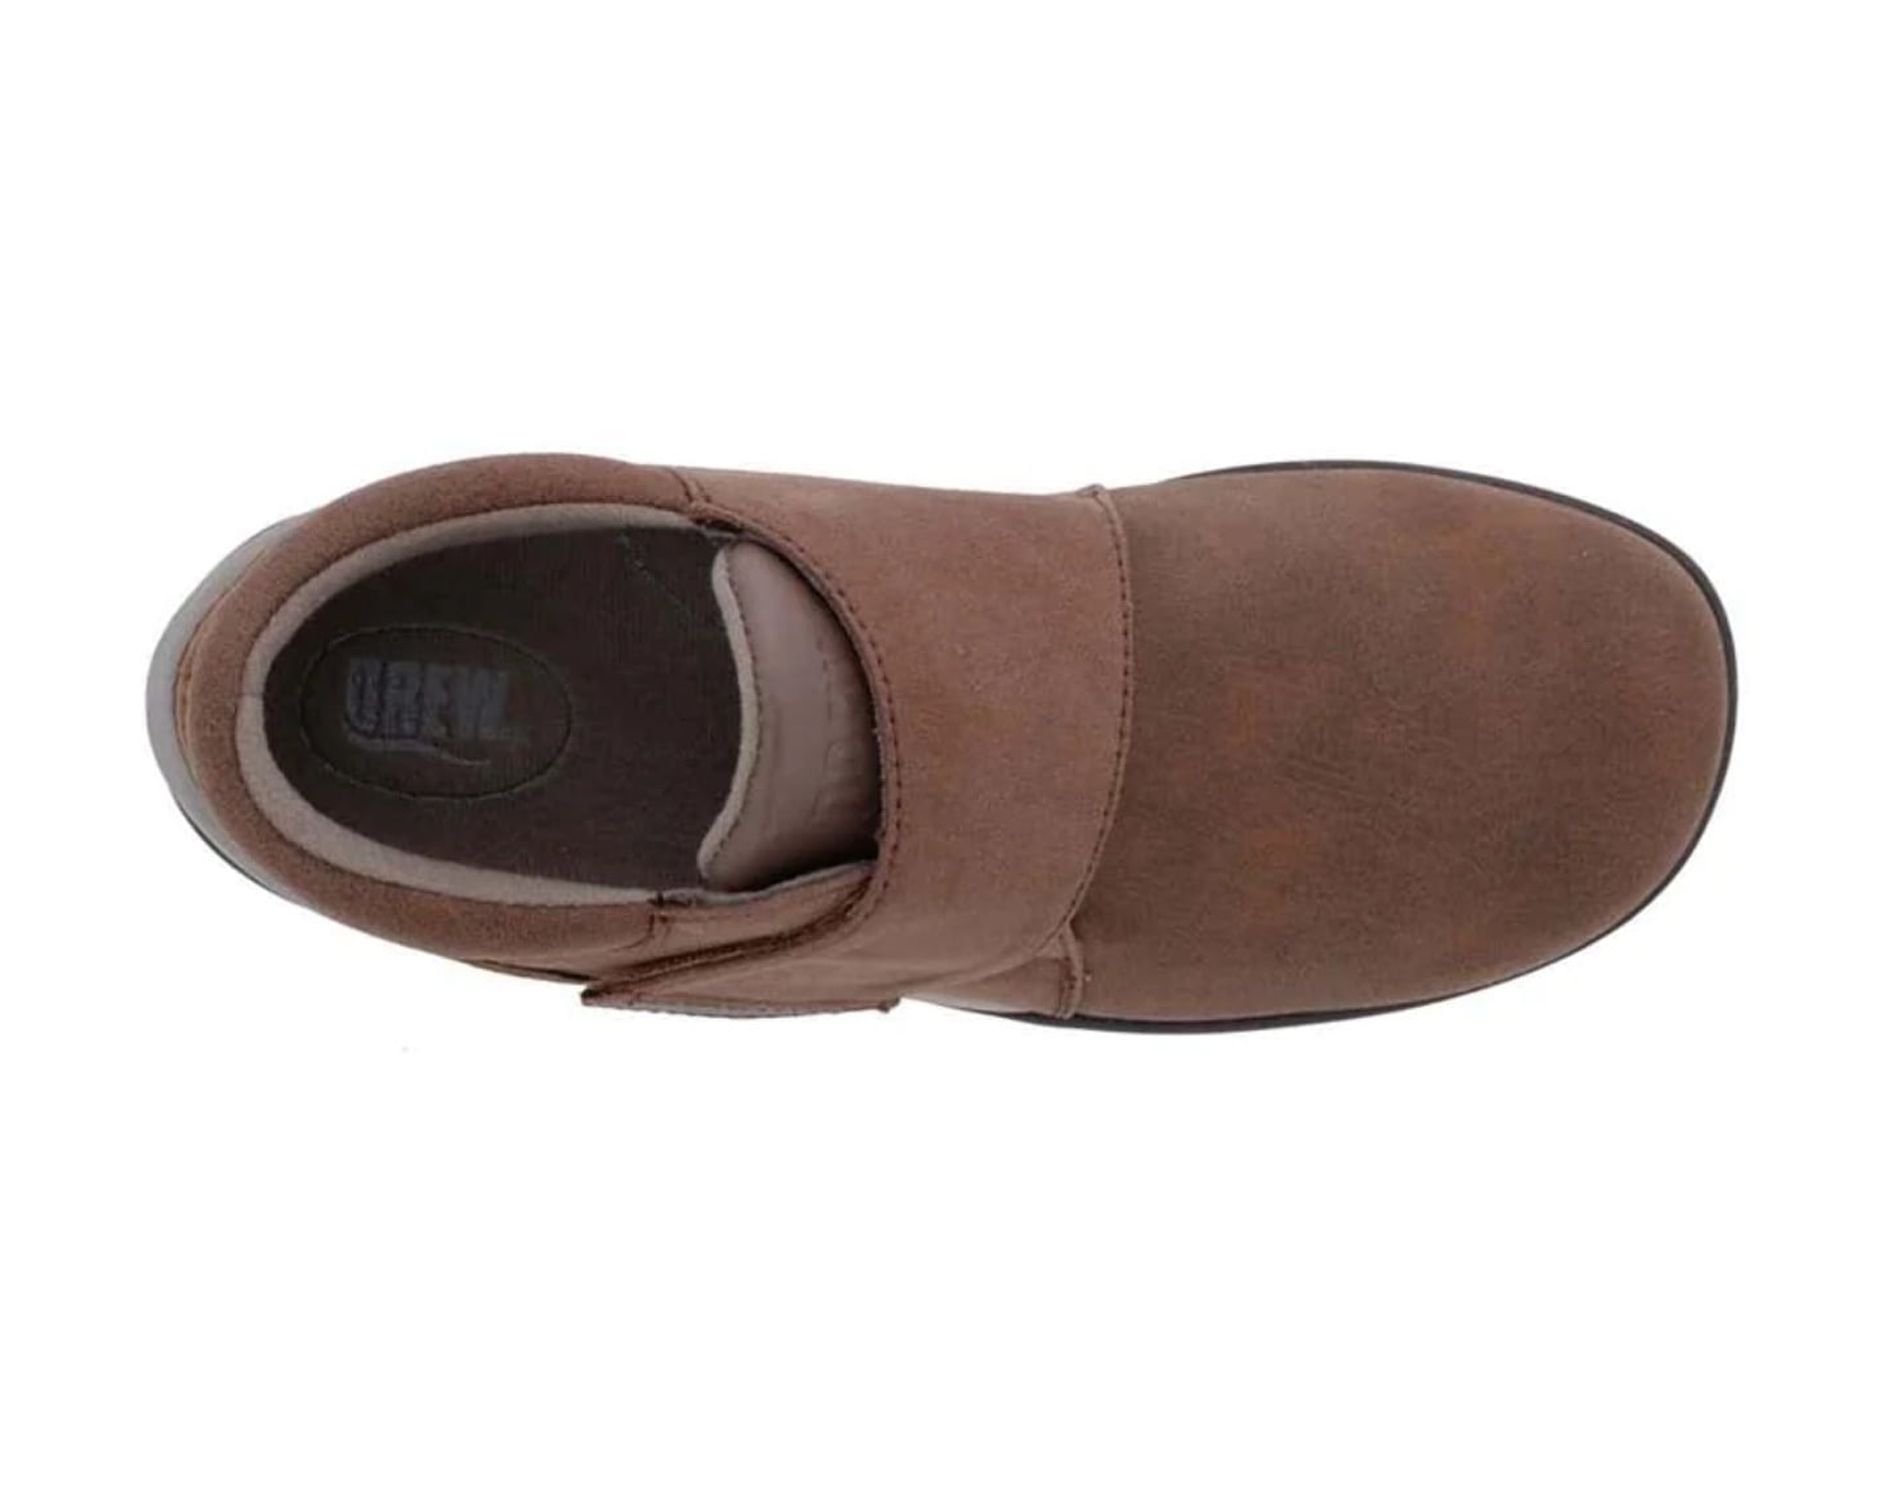 DREW MOONWALK WOMEN CASUAL SHOE IN BROWN STRETCH LEATHER - image 3 of 5